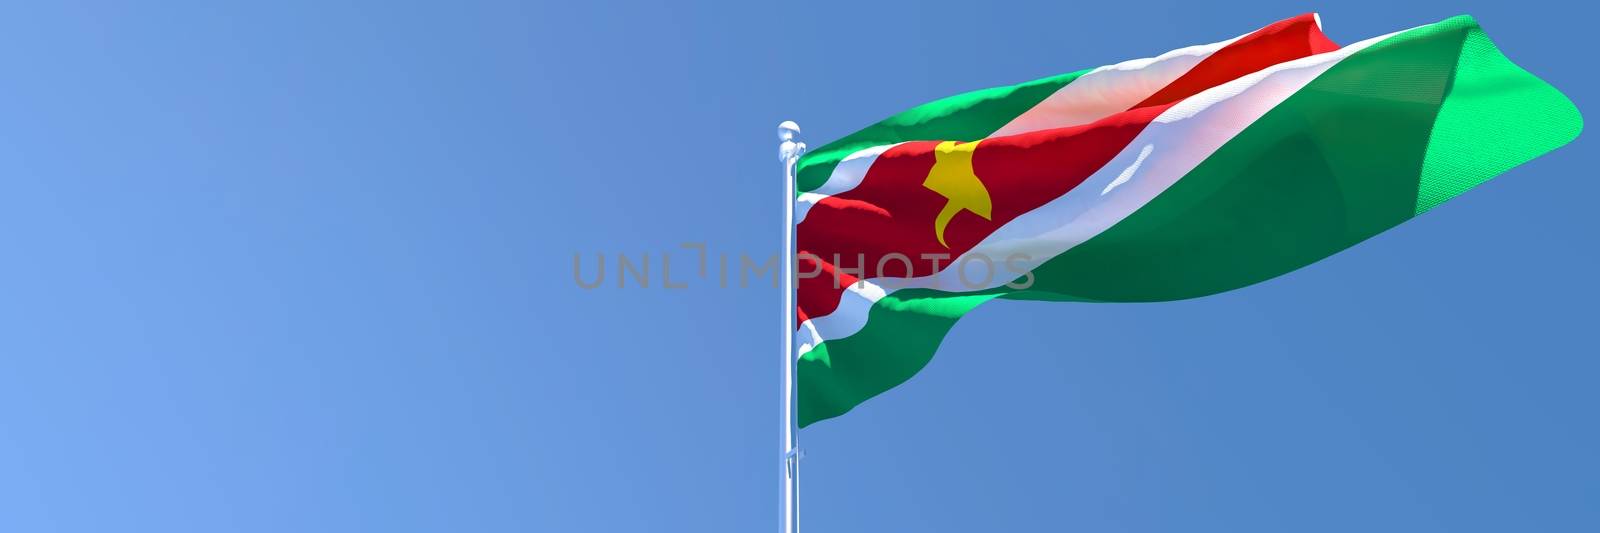 3D rendering of the national flag of Suriname waving in the wind against a blue sky